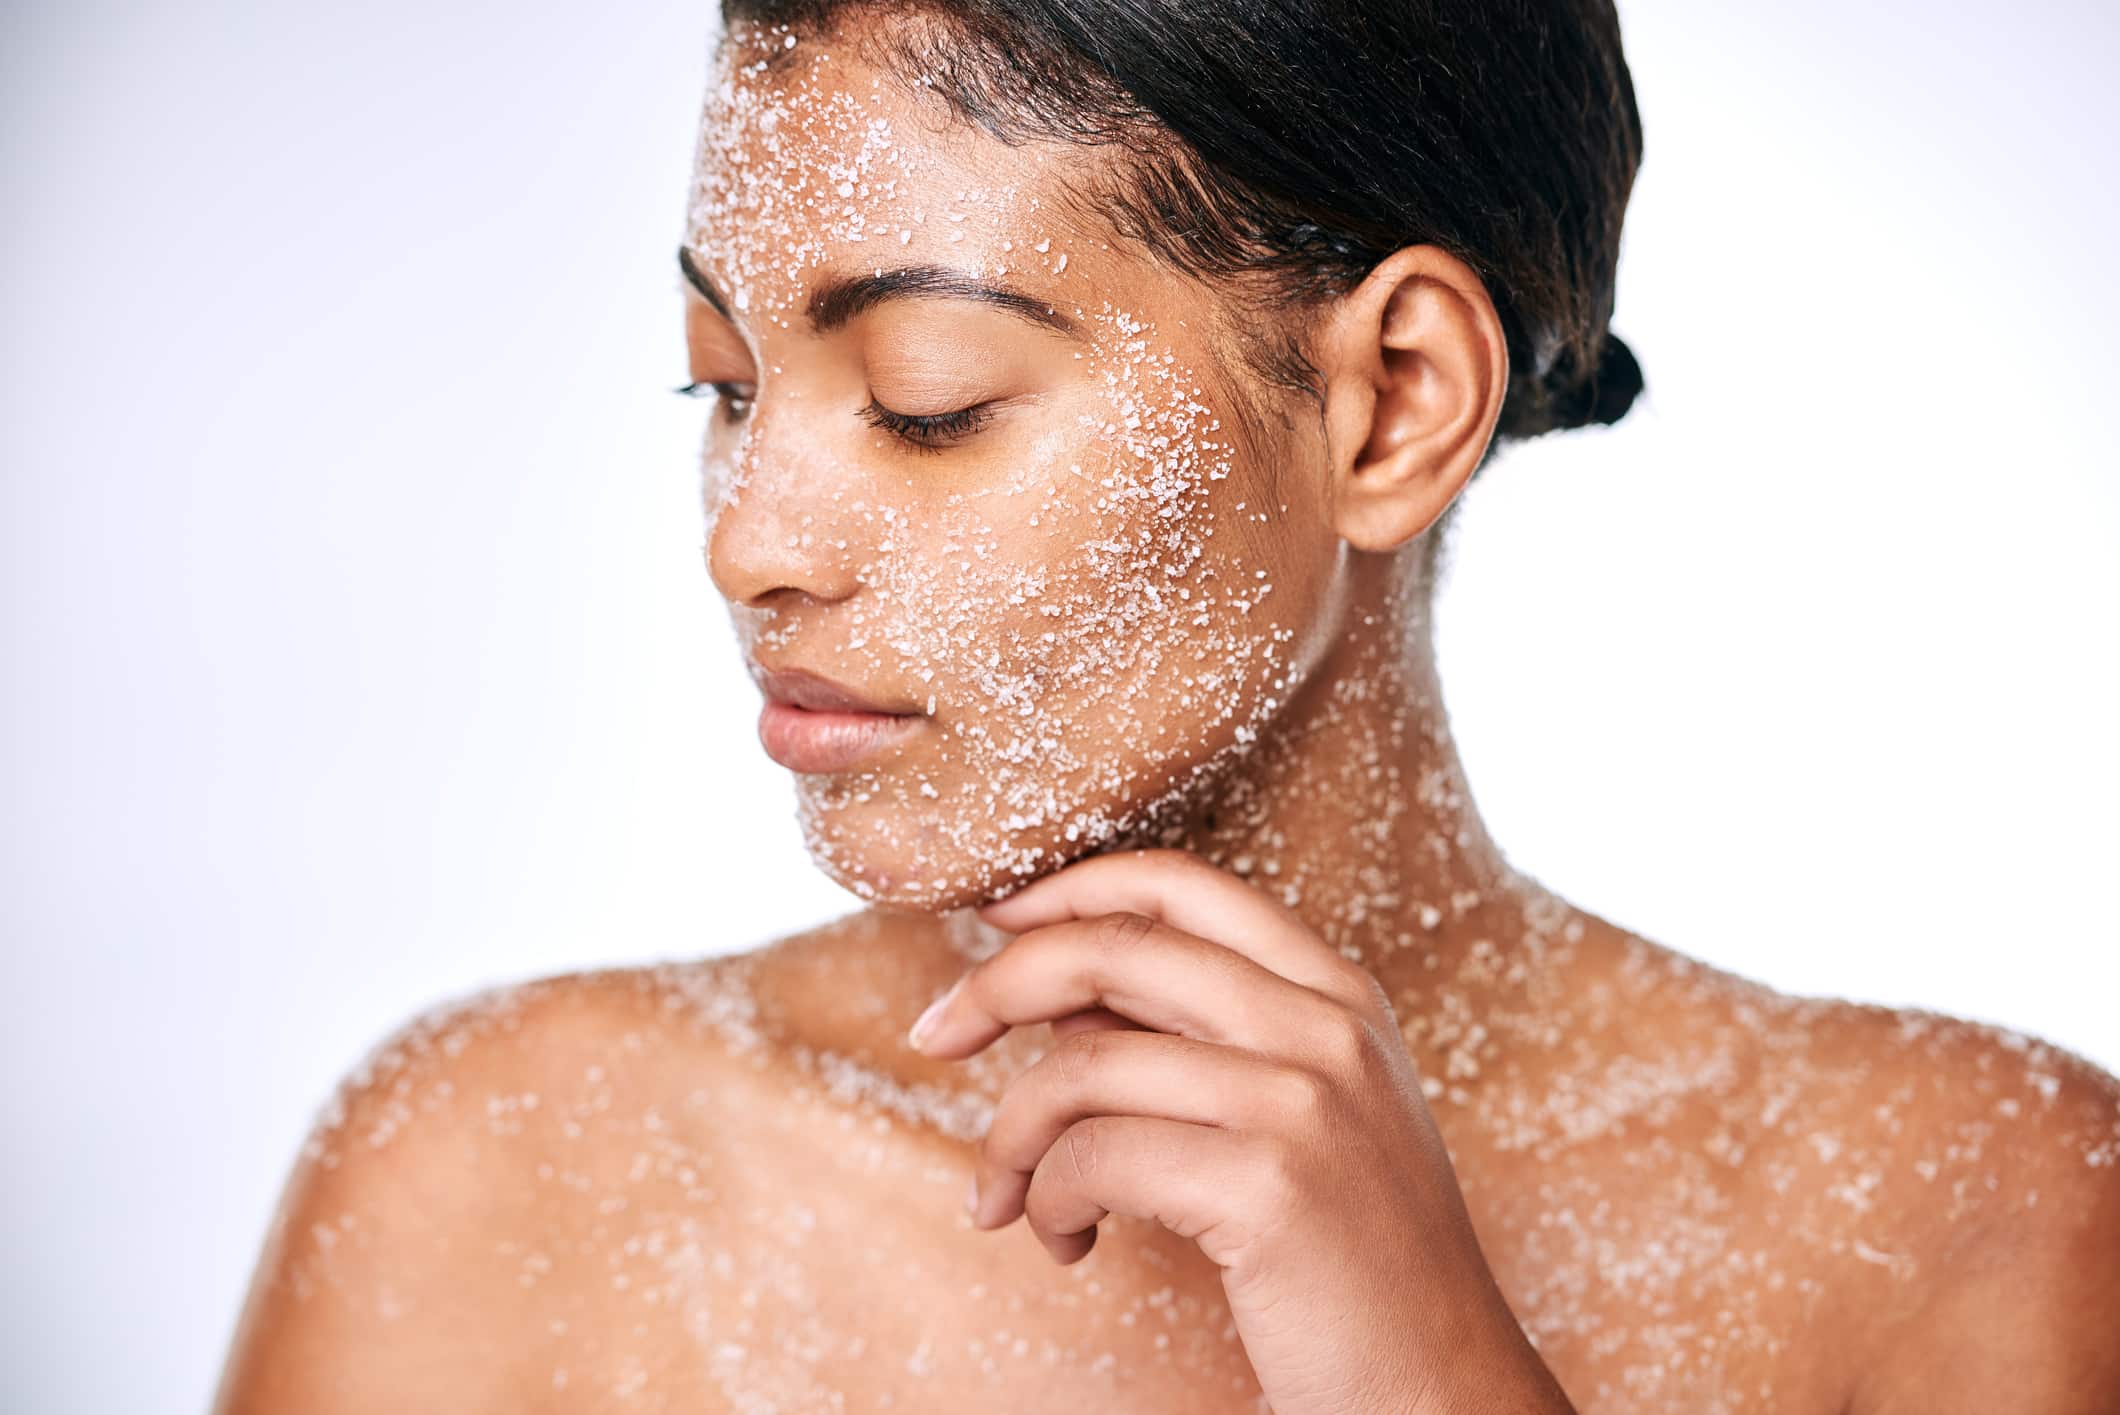 Do your know the benefits of using salt for your skin?